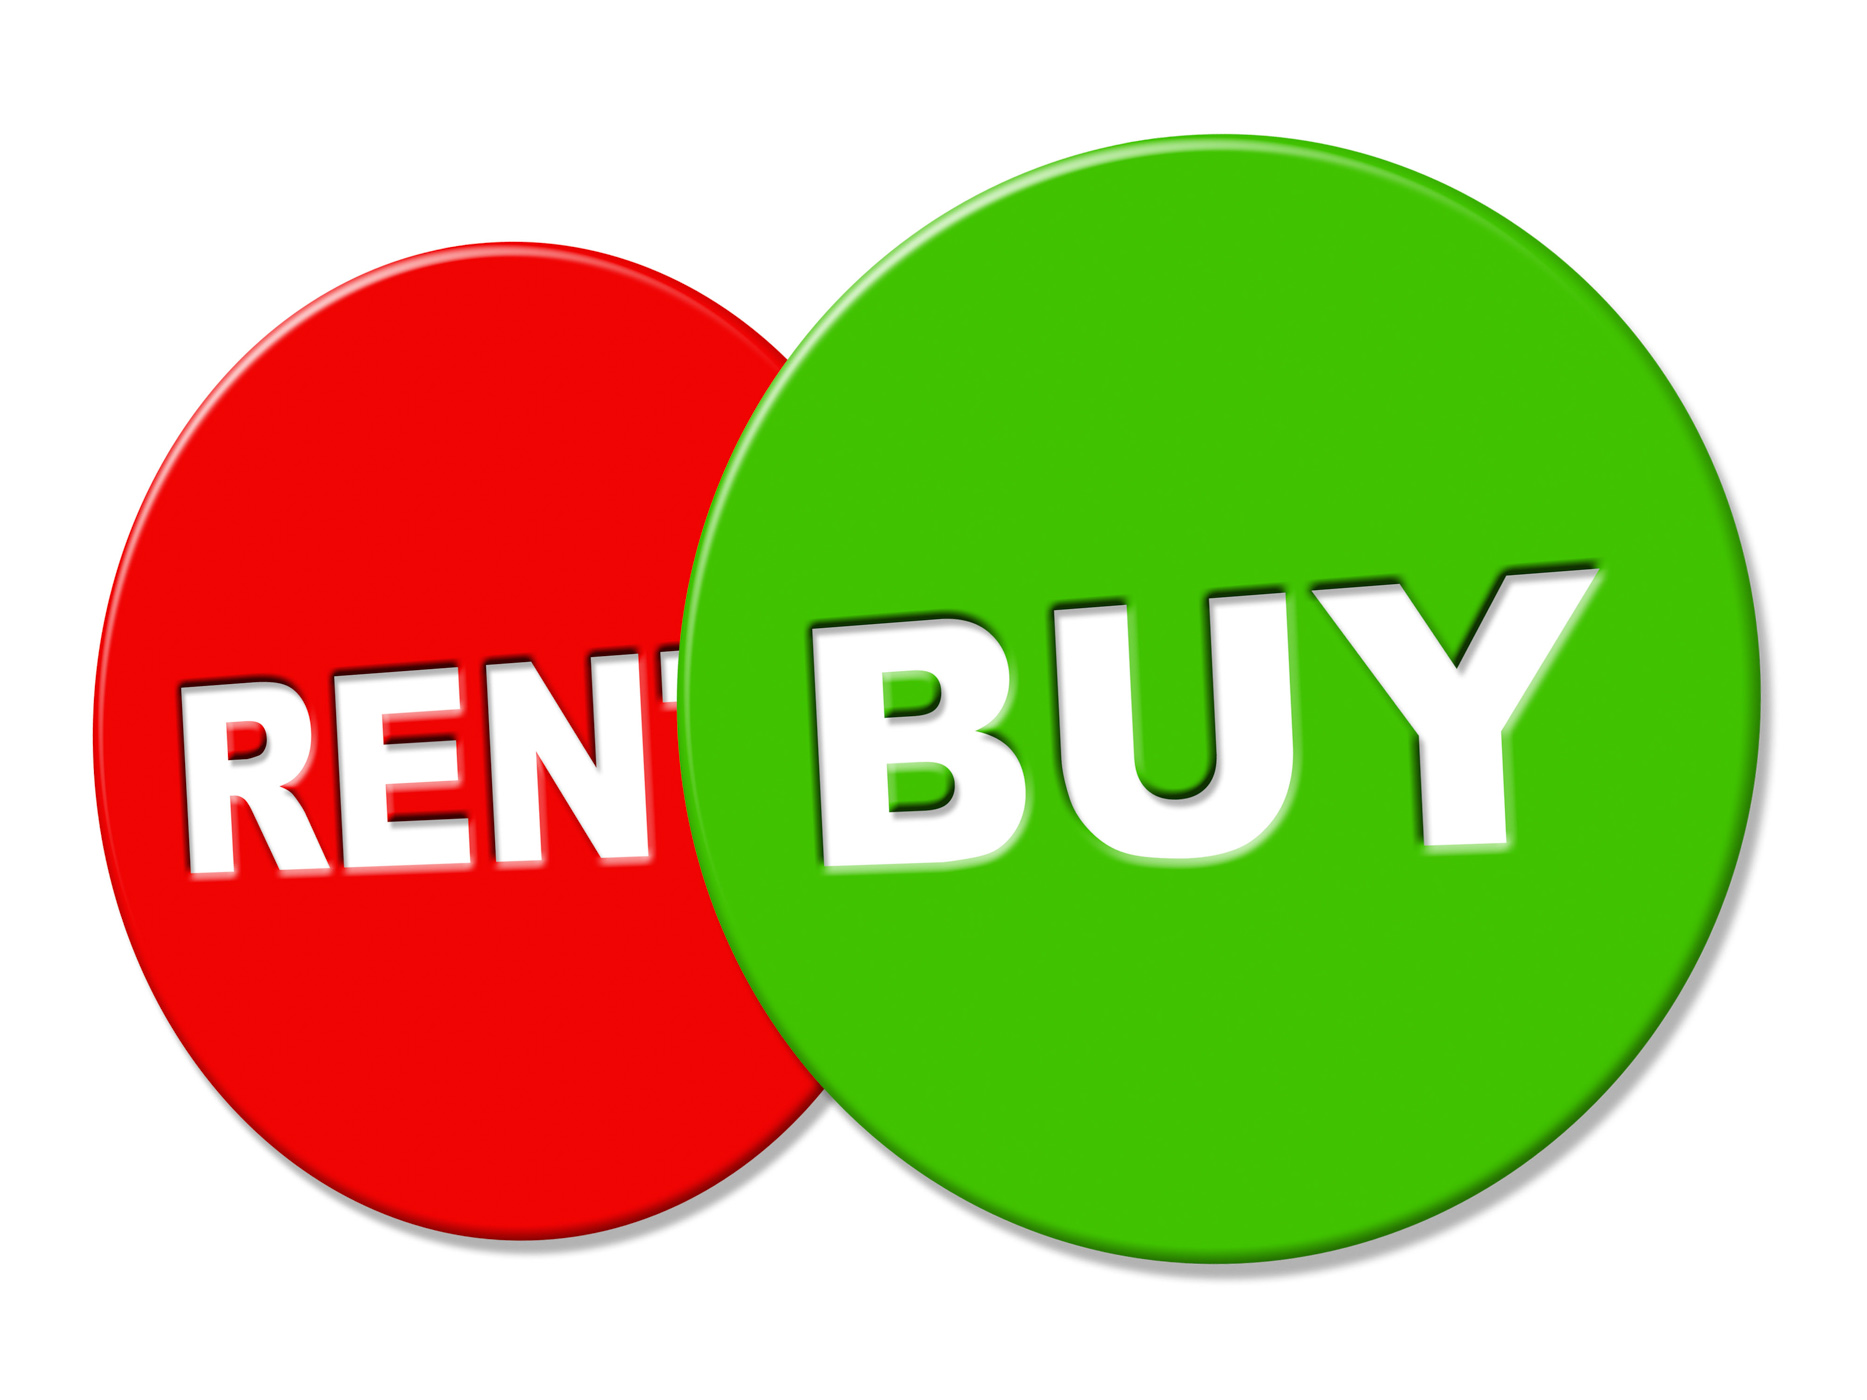 Buy sign indicates message bought and purchasing photo